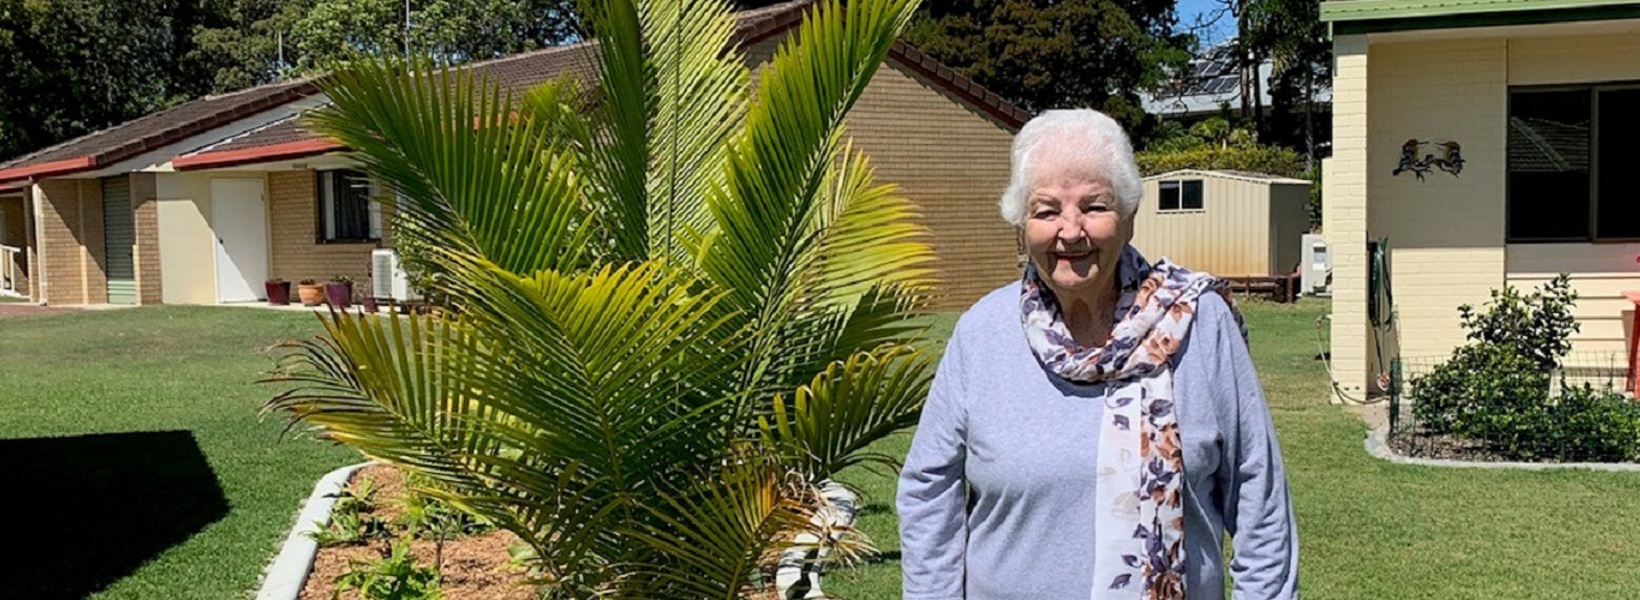 Cilla worked as a nurse at the Gold coast for 40 years